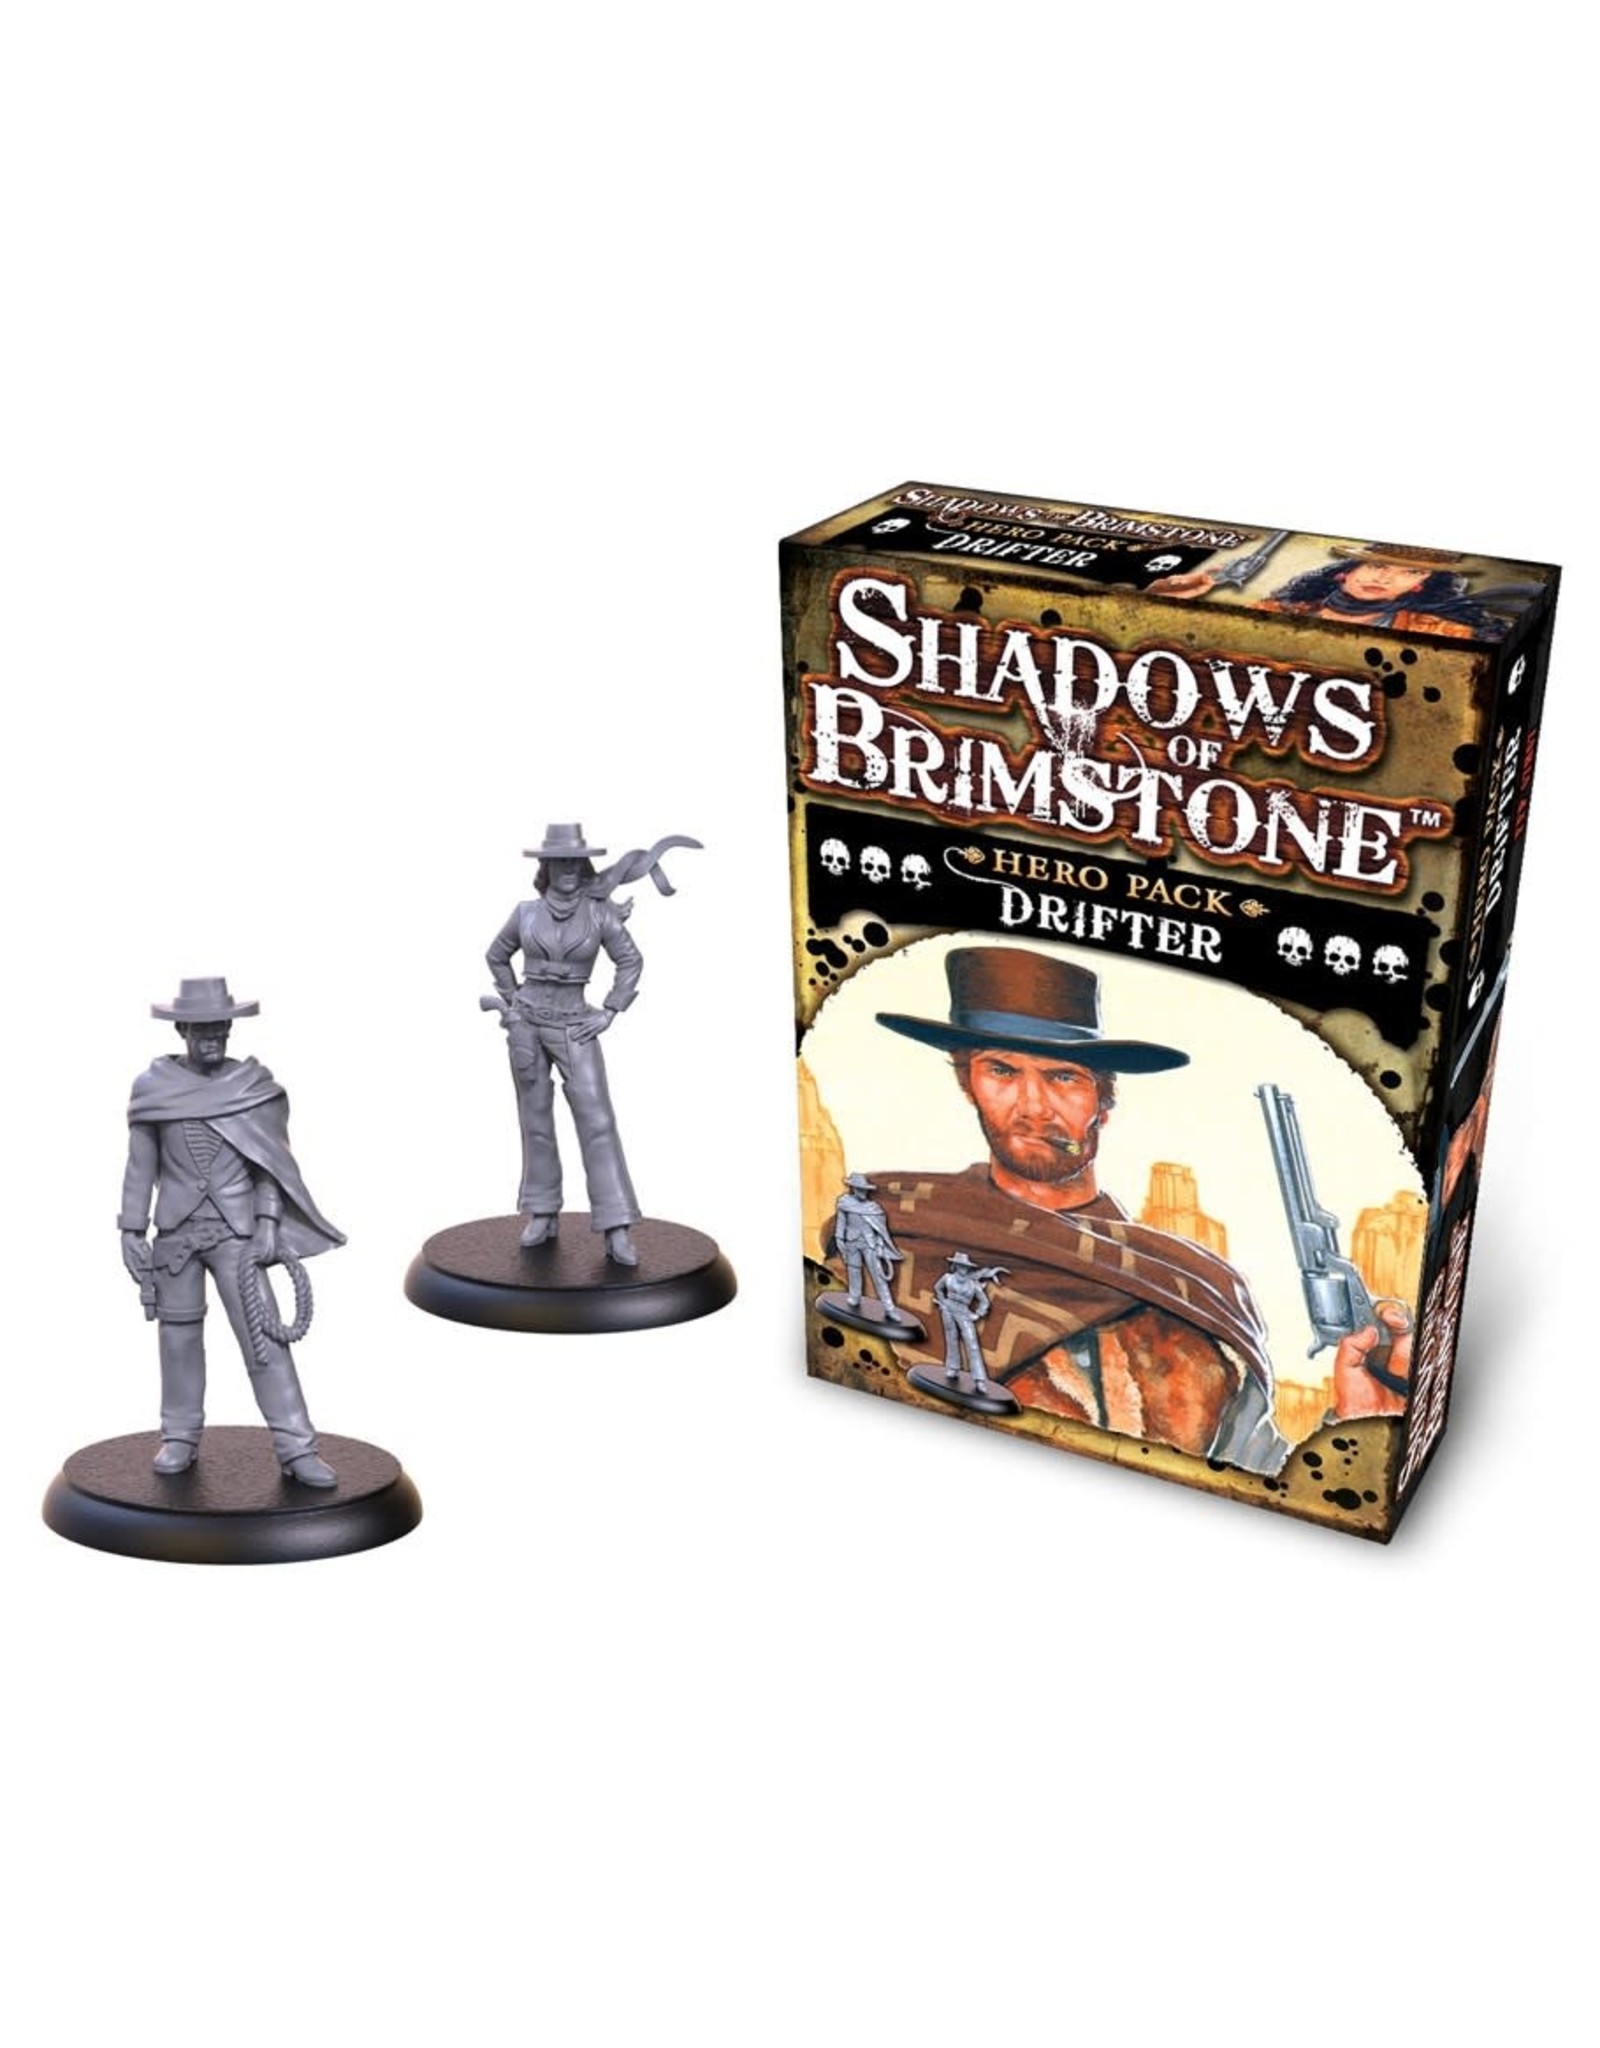 Flying Frog Productions Shadows Of Brimstone: Hero Pack Drifter